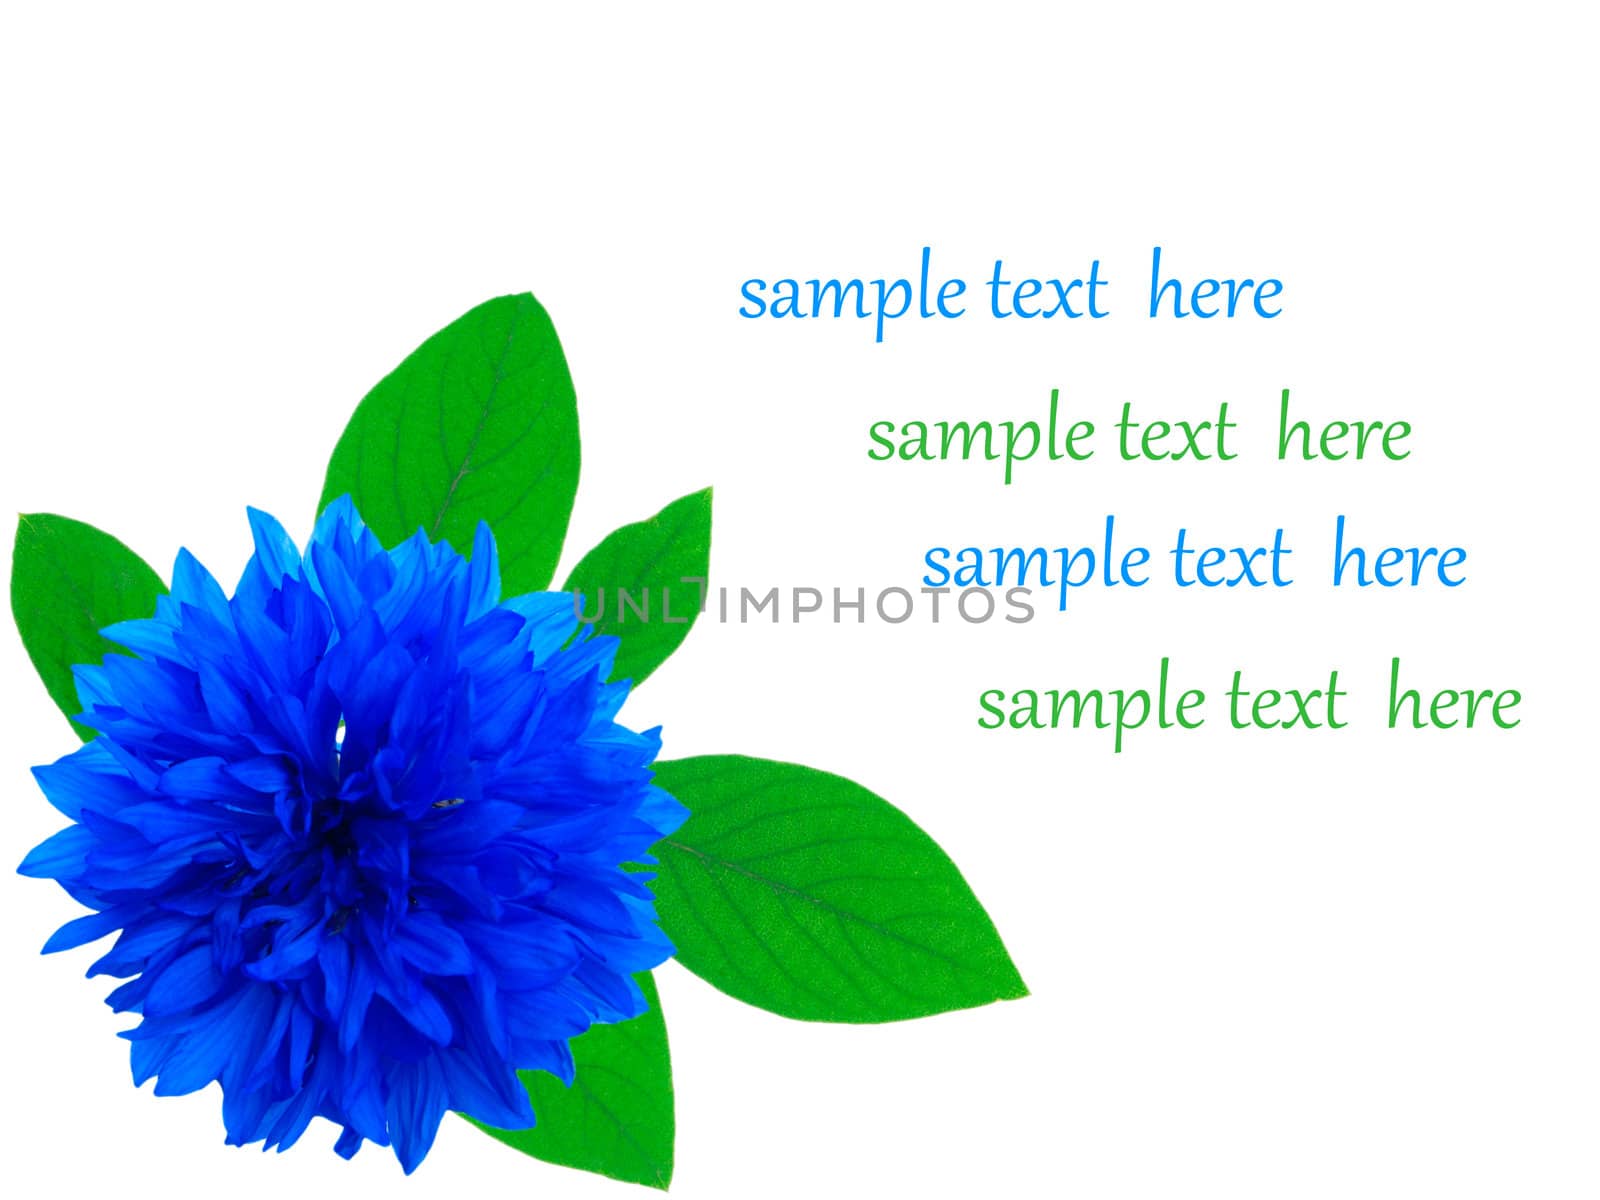 cornflower isolated on white background with with room for text 